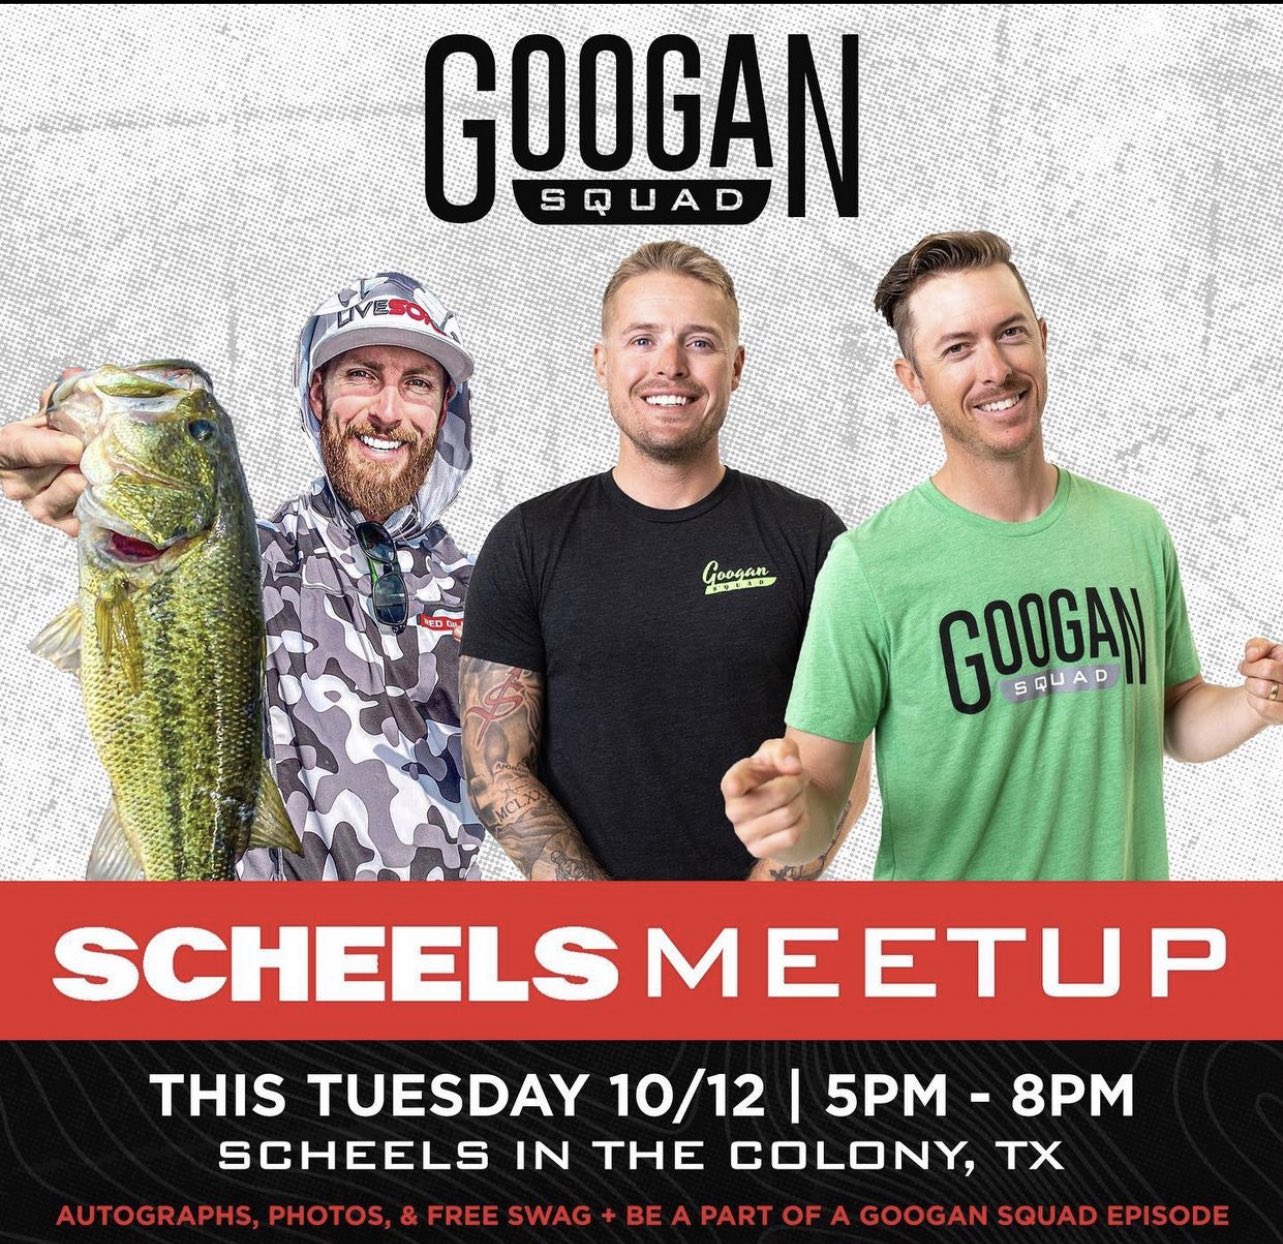 Googan Squad on X: What's up Squad? There's a Googan Meetup this